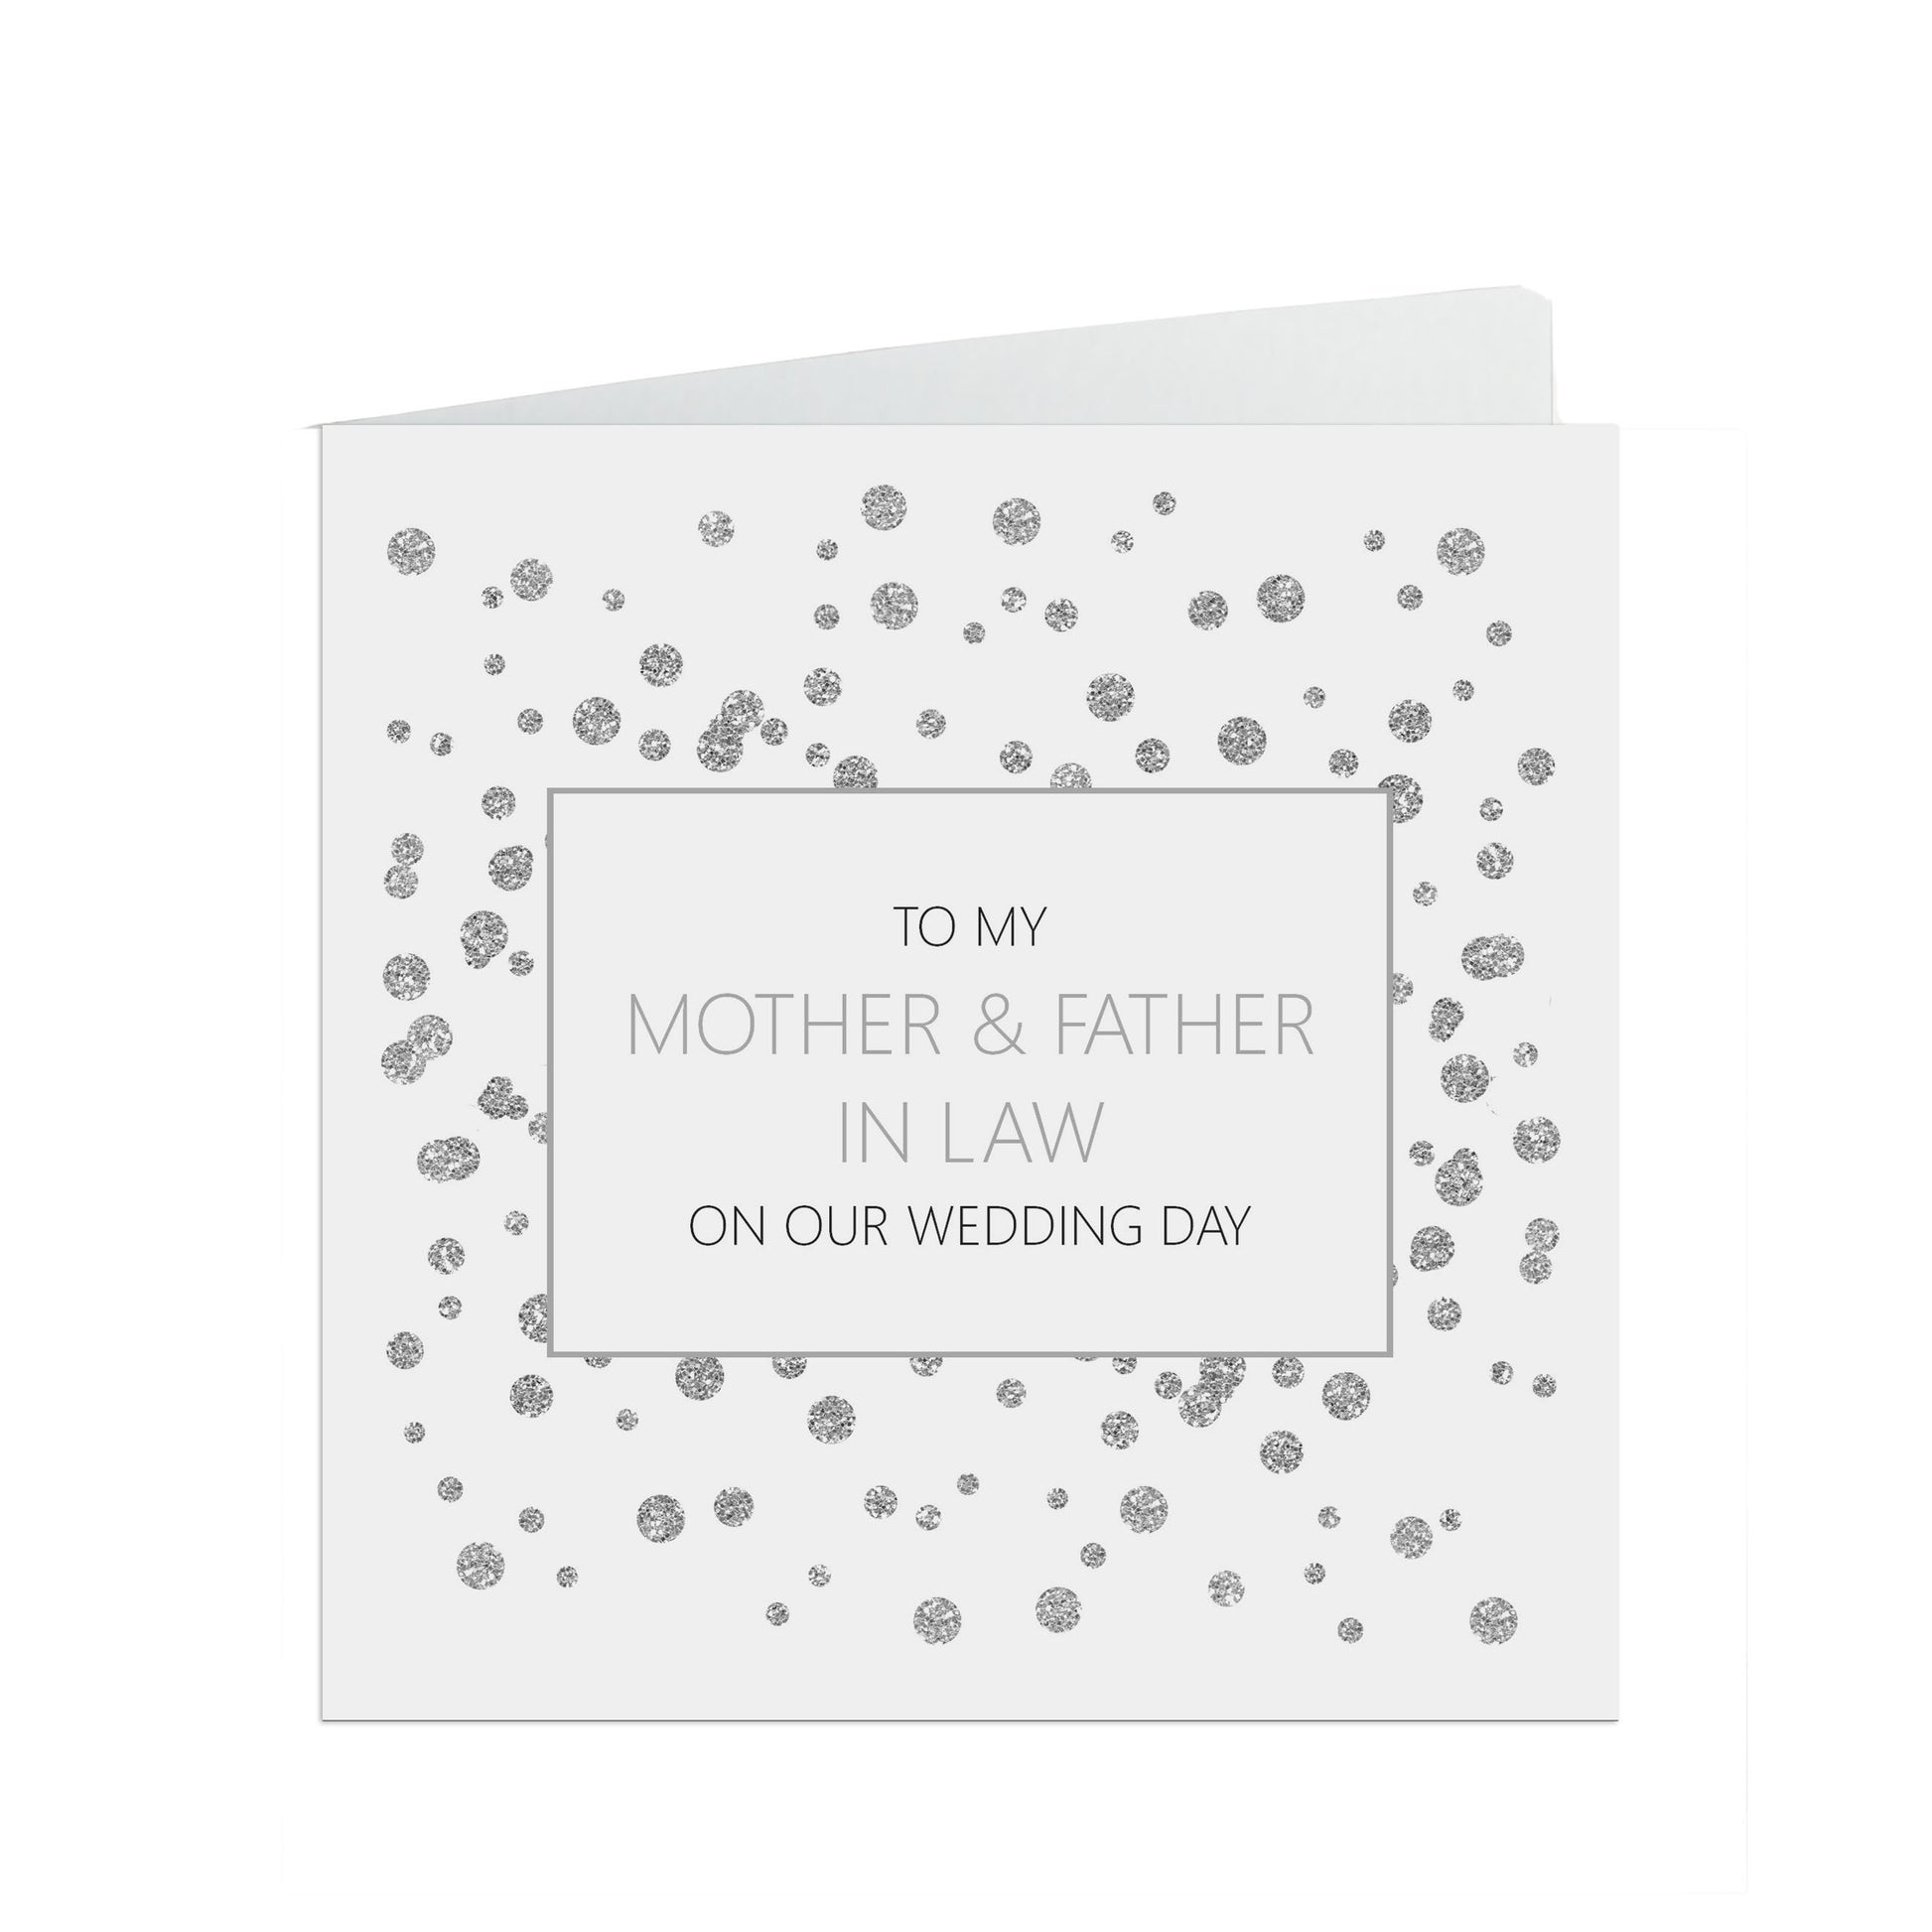 Mother And Father In Law On Our Wedding Day Card, Silver Effect 6x6 Inches With A White Envelope